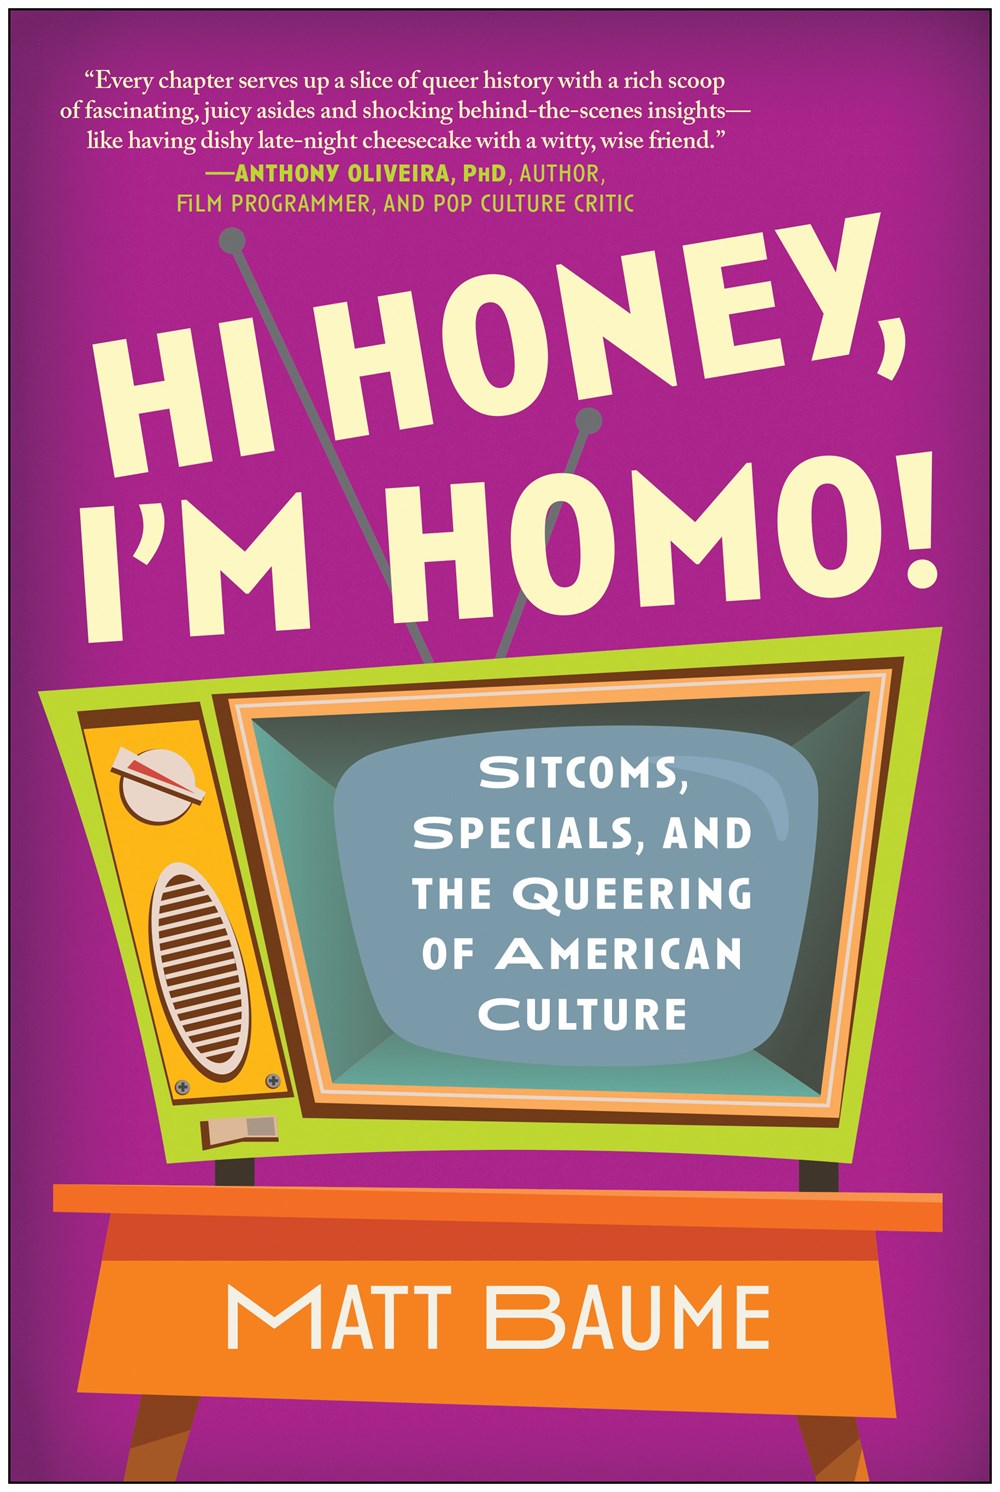 Hi Honey, I'm Homo! : Sitcoms, Specials, and the Queering of American Culture